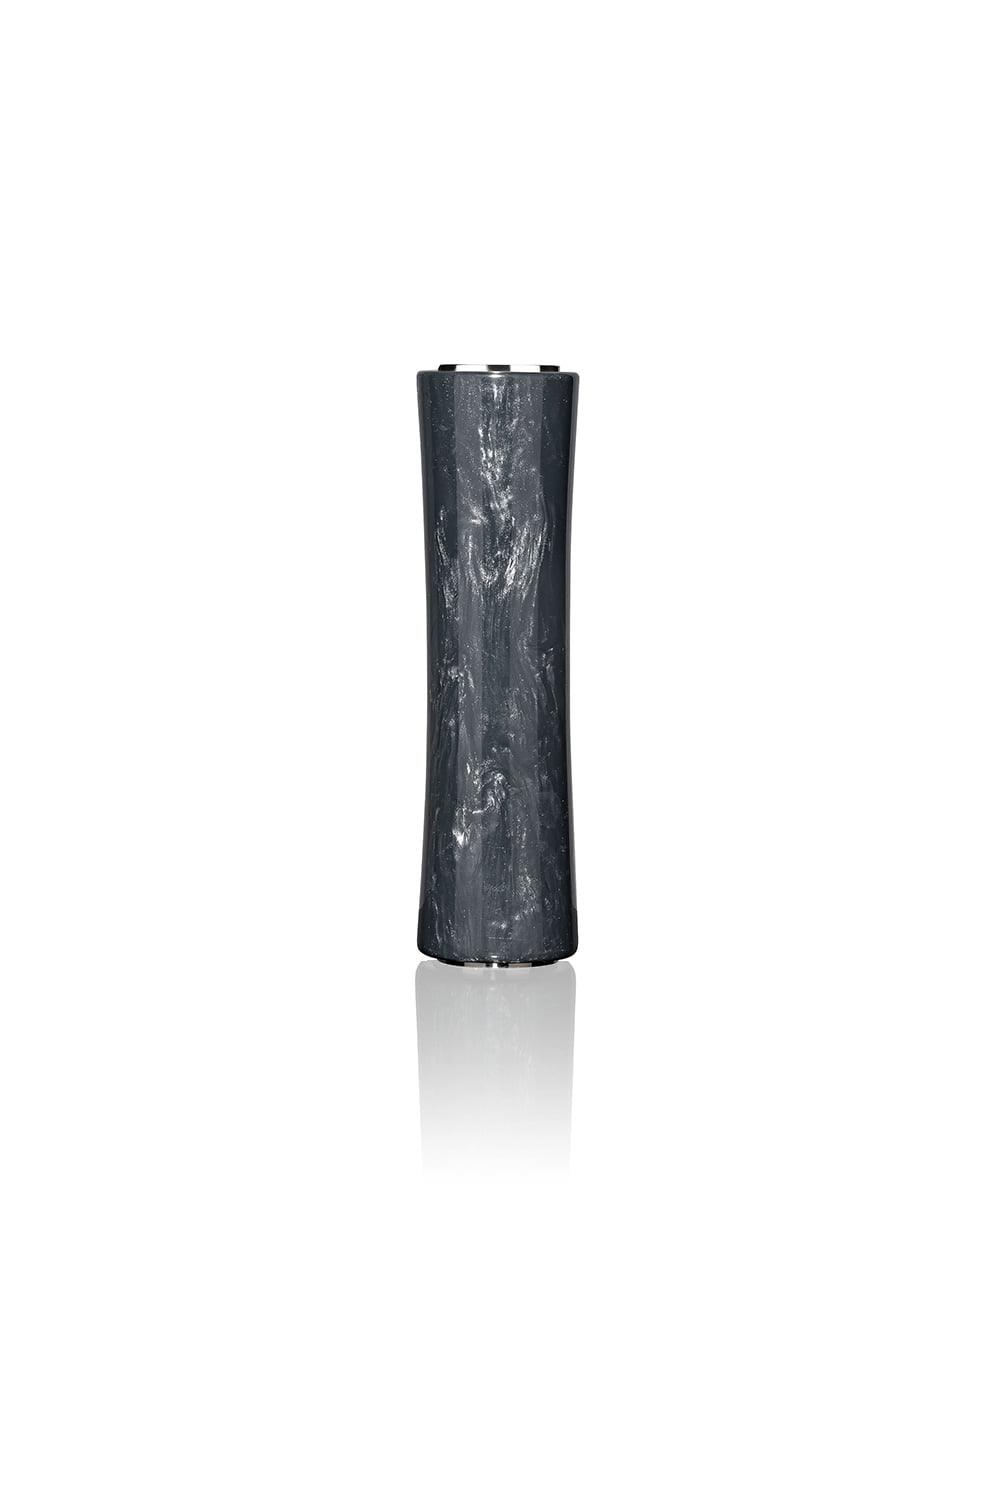 Steamulation Marble Epoxy Column Sleeve Small